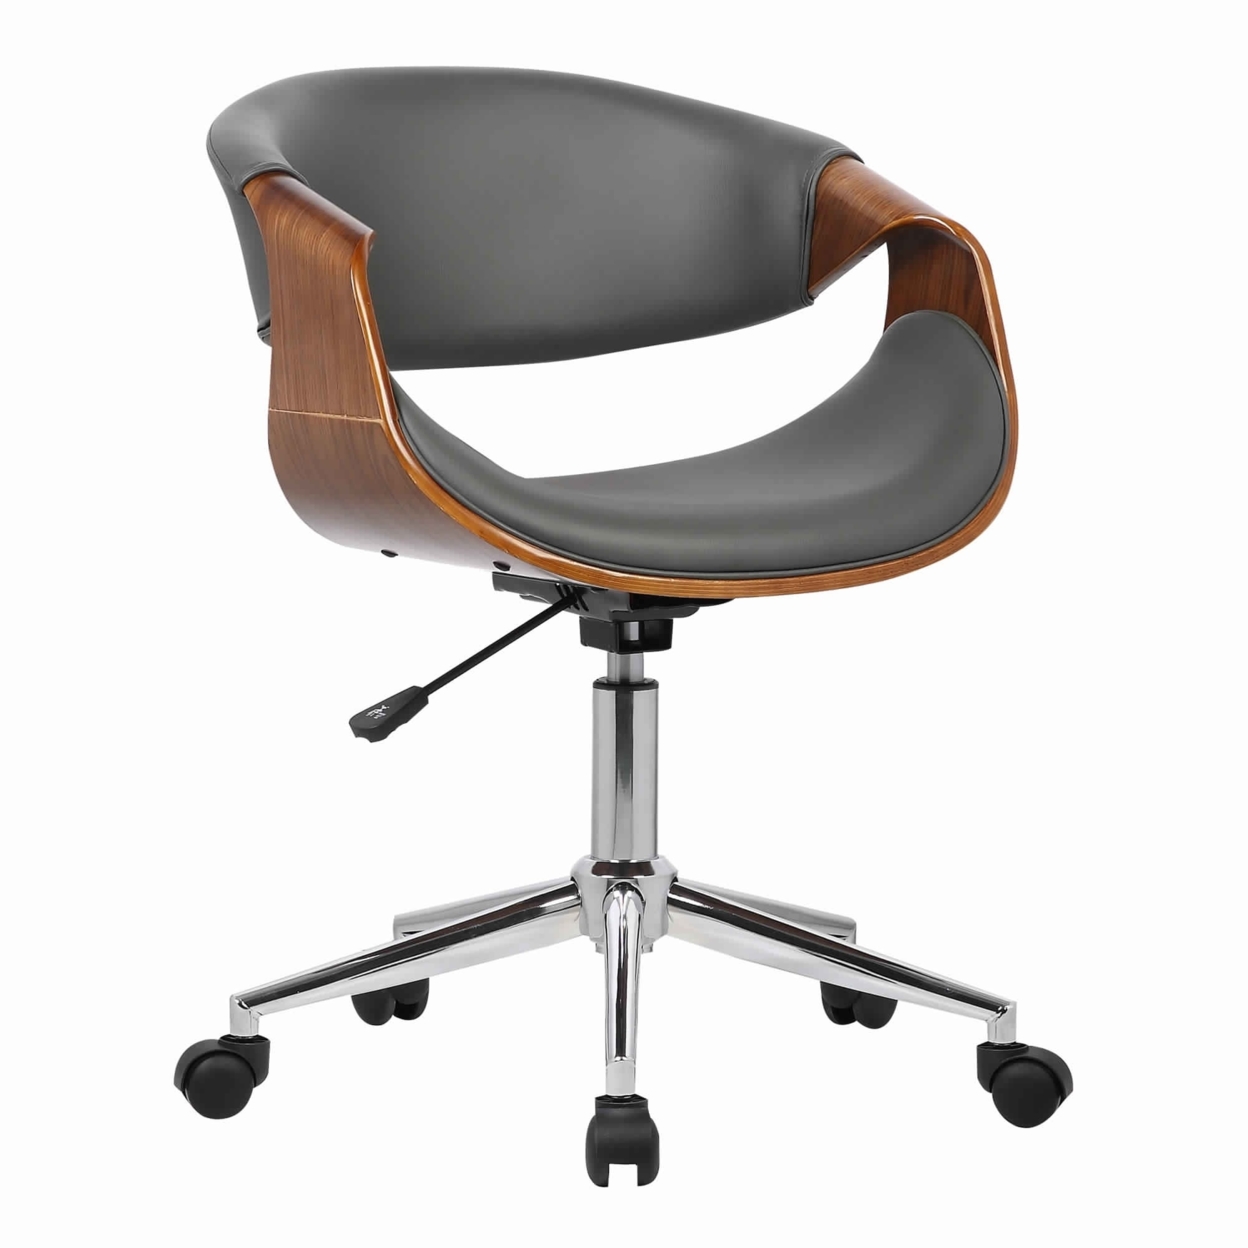 Curved Leatherette Wooden Frame Adjustable Office Chair, Brown And Gray- Saltoro Sherpi